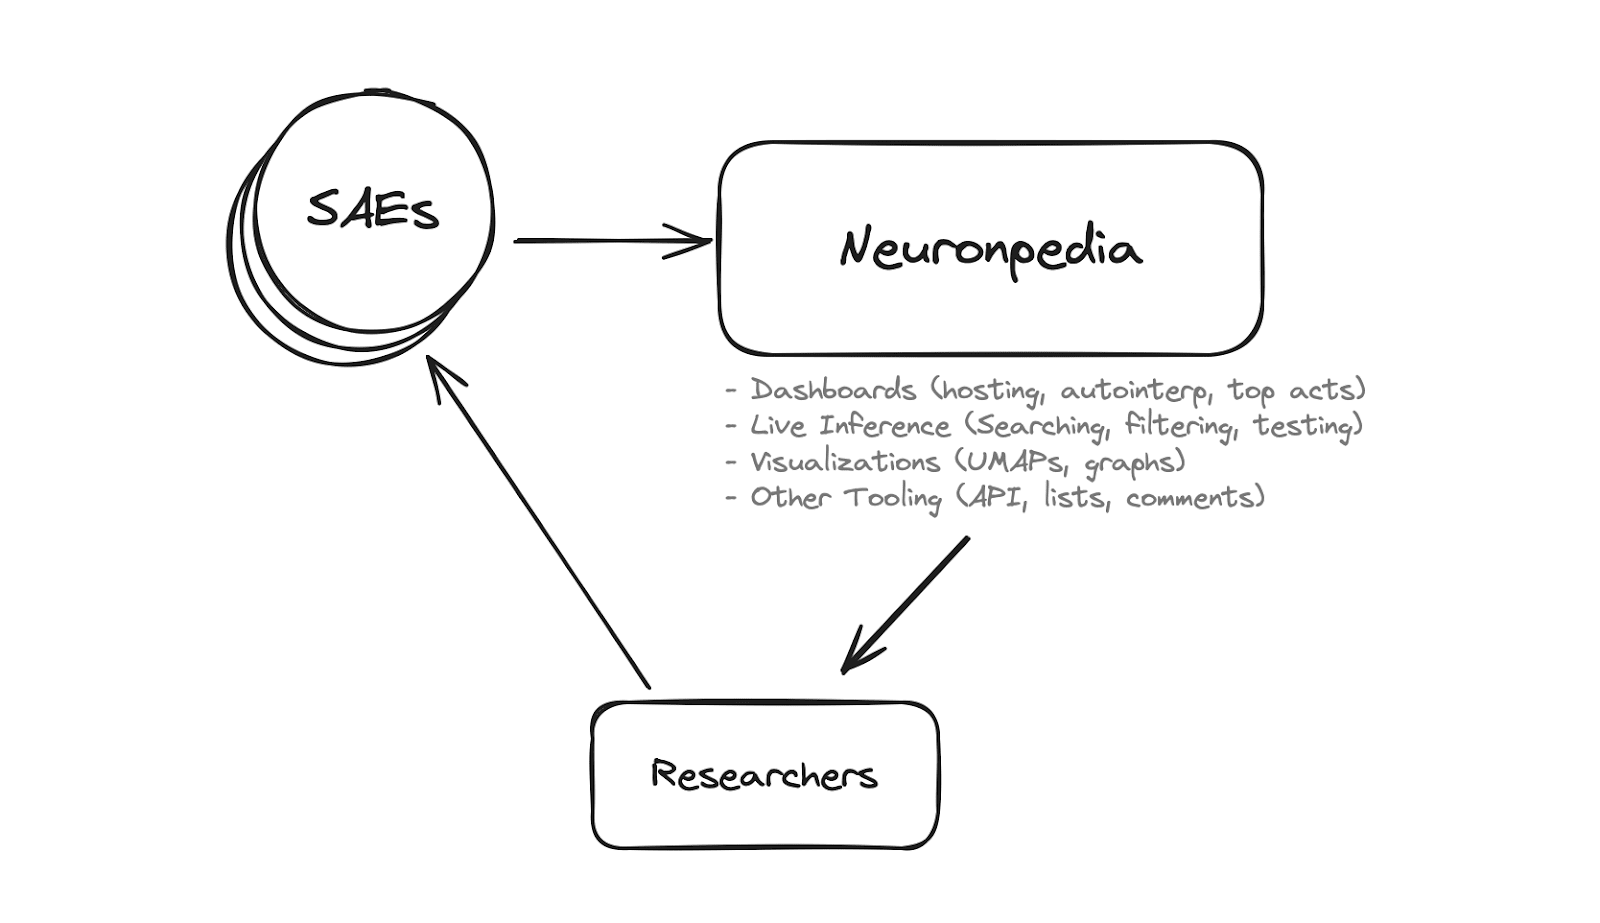 Diagram showing a cycle from SAEs -&gt; Neuronpedia -&gt; Researchers and back to SAEs